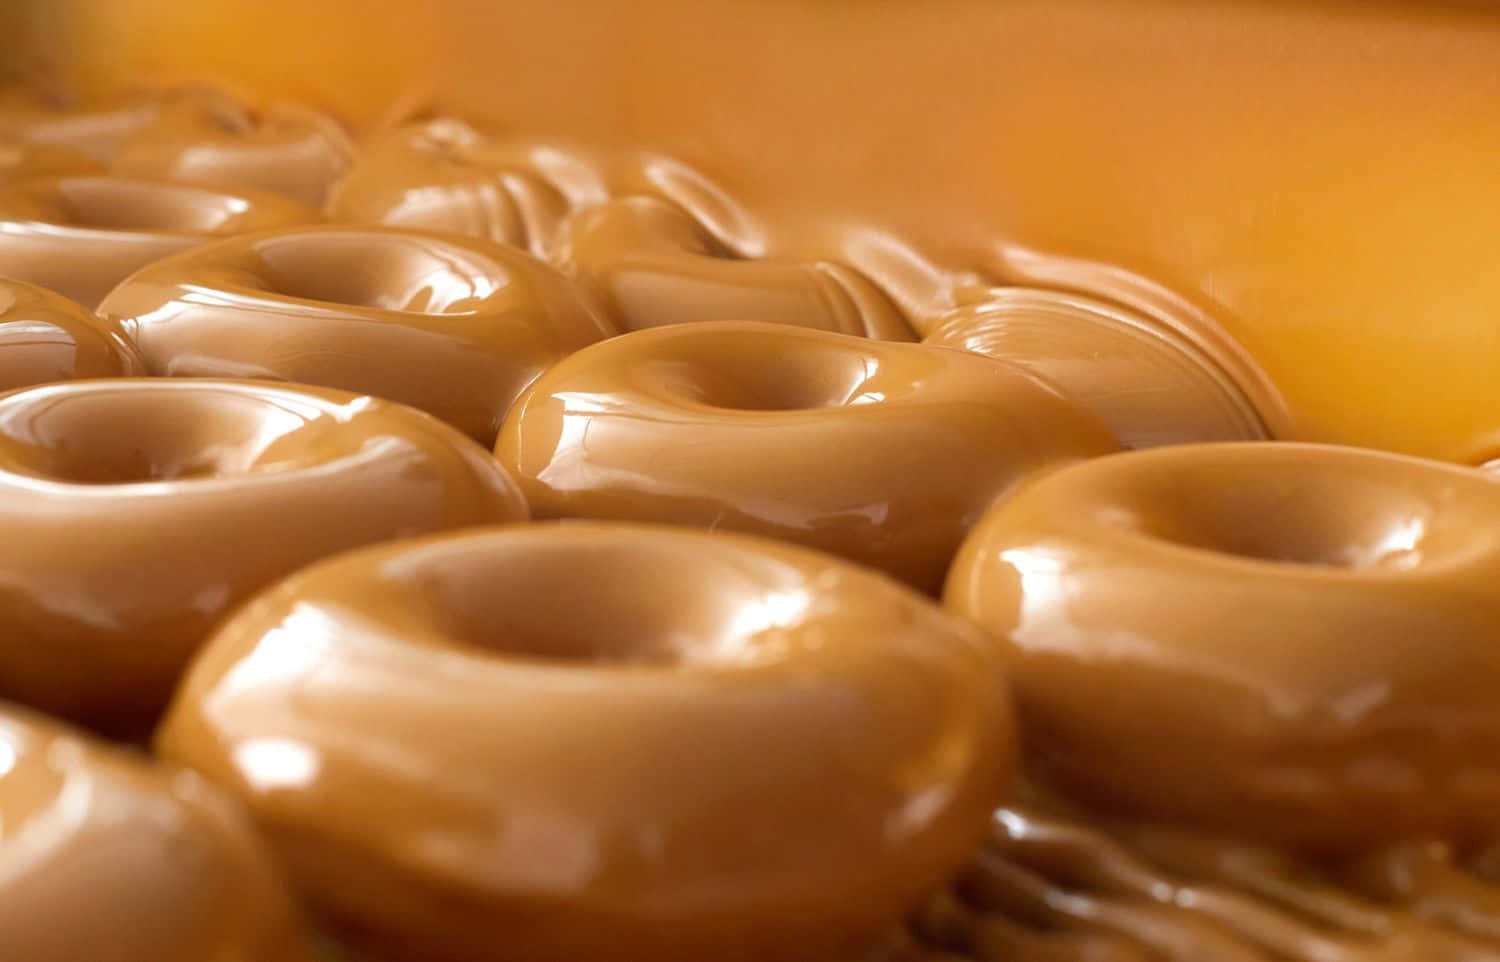 A freshly made glazed donut ready for your breakfast or snack. Wallpaper